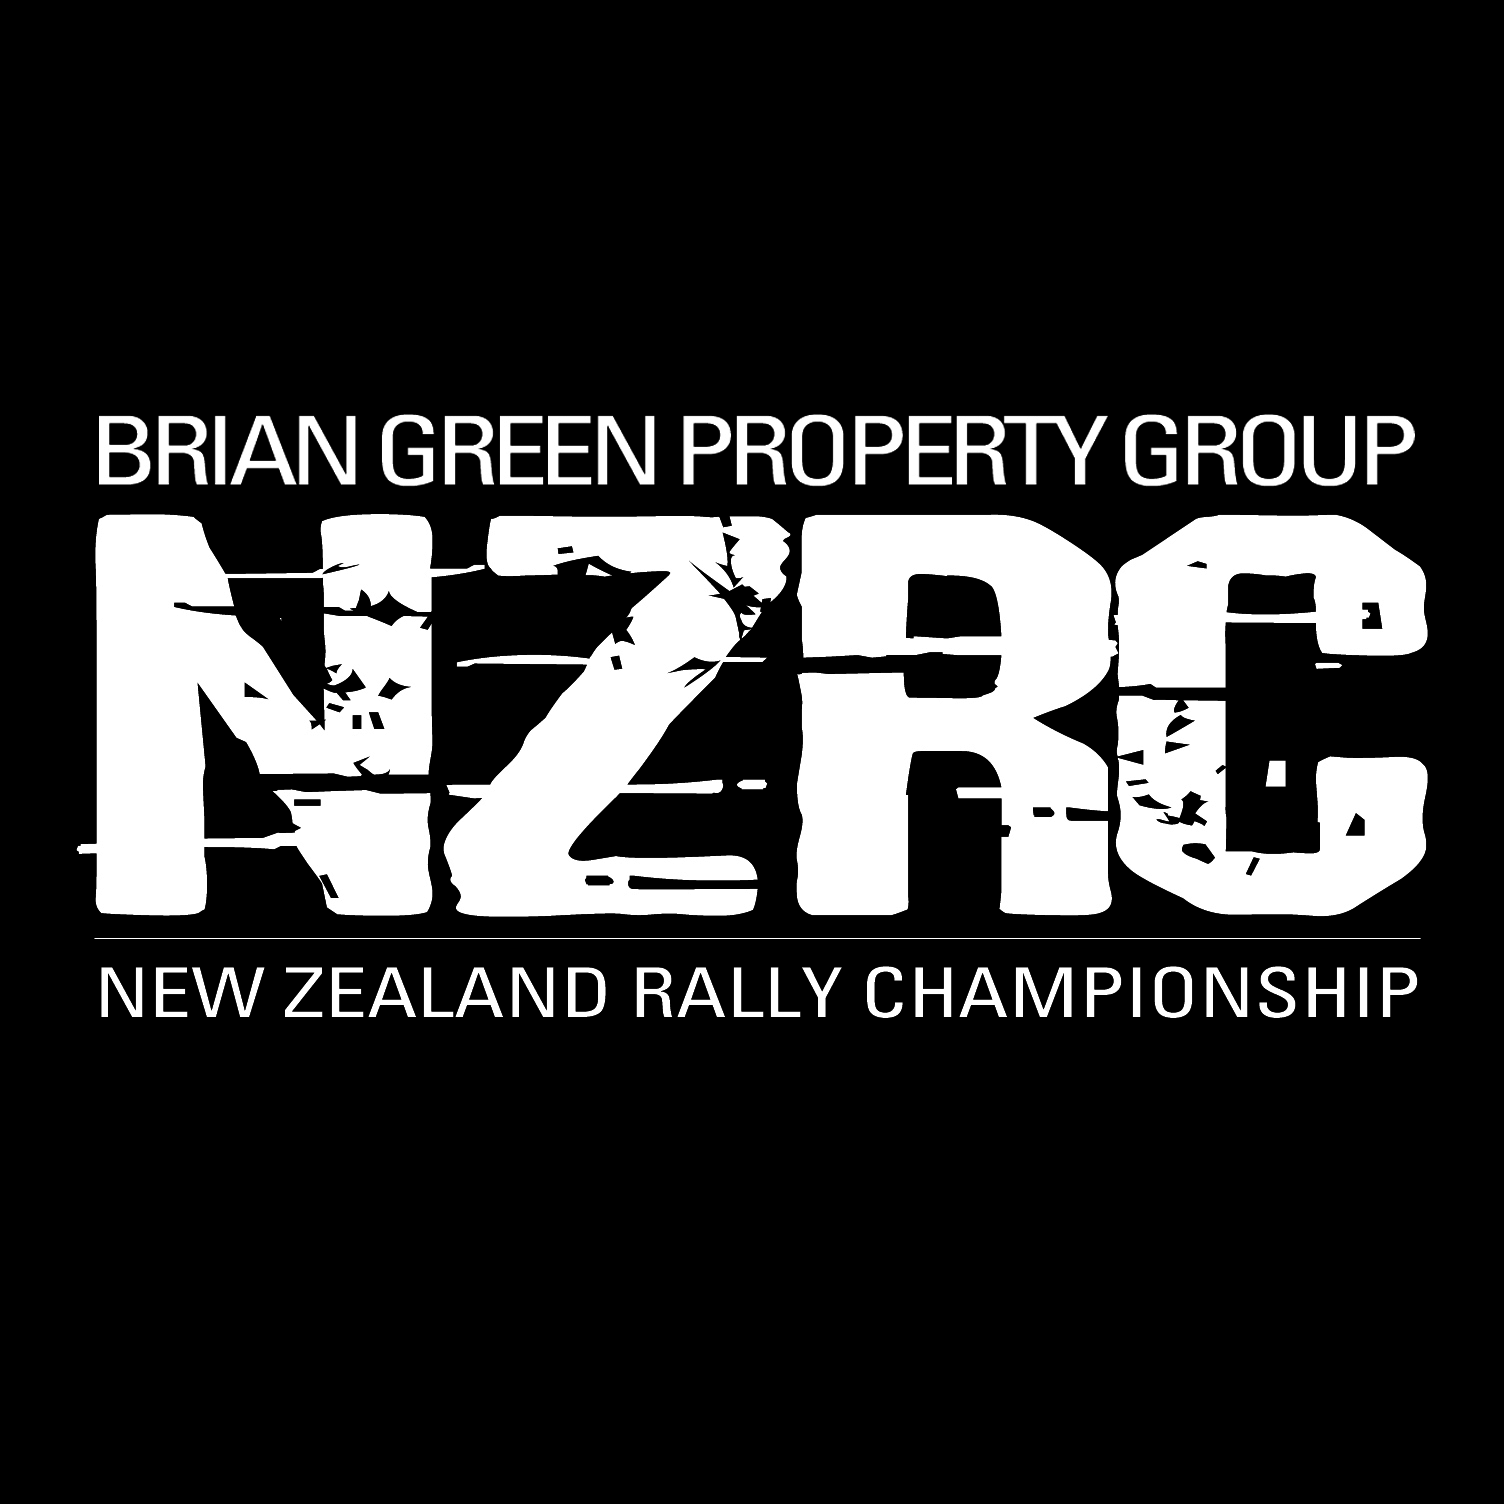 Podium honours at stake during season finale | :: Brian Green Property Group New Zealand Rally Championship ::